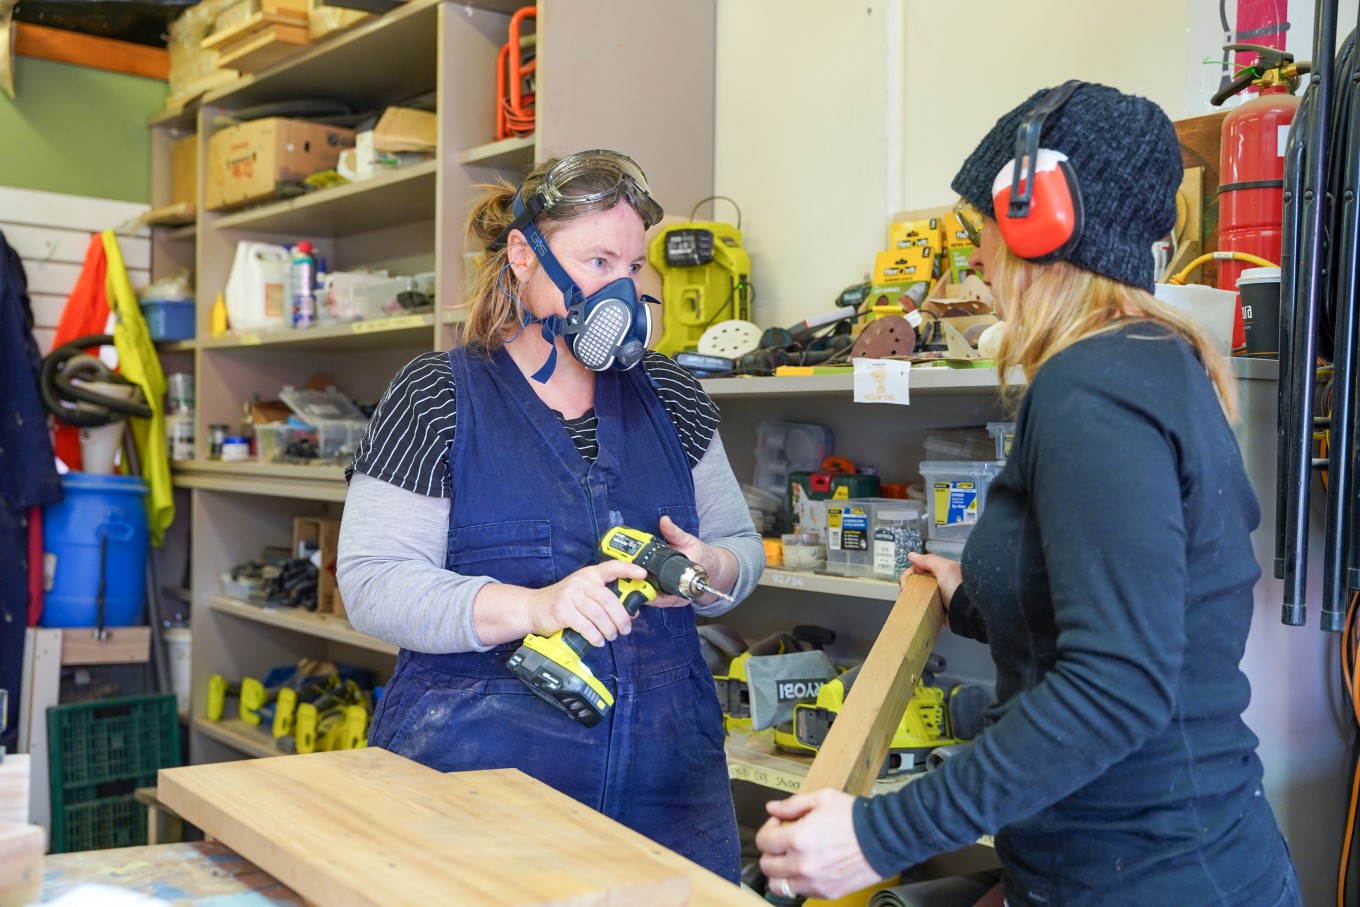 Woodwork tutor Buffie Mawhinney says it’s great to see class members developing confidence over the course of the 10 weeks.